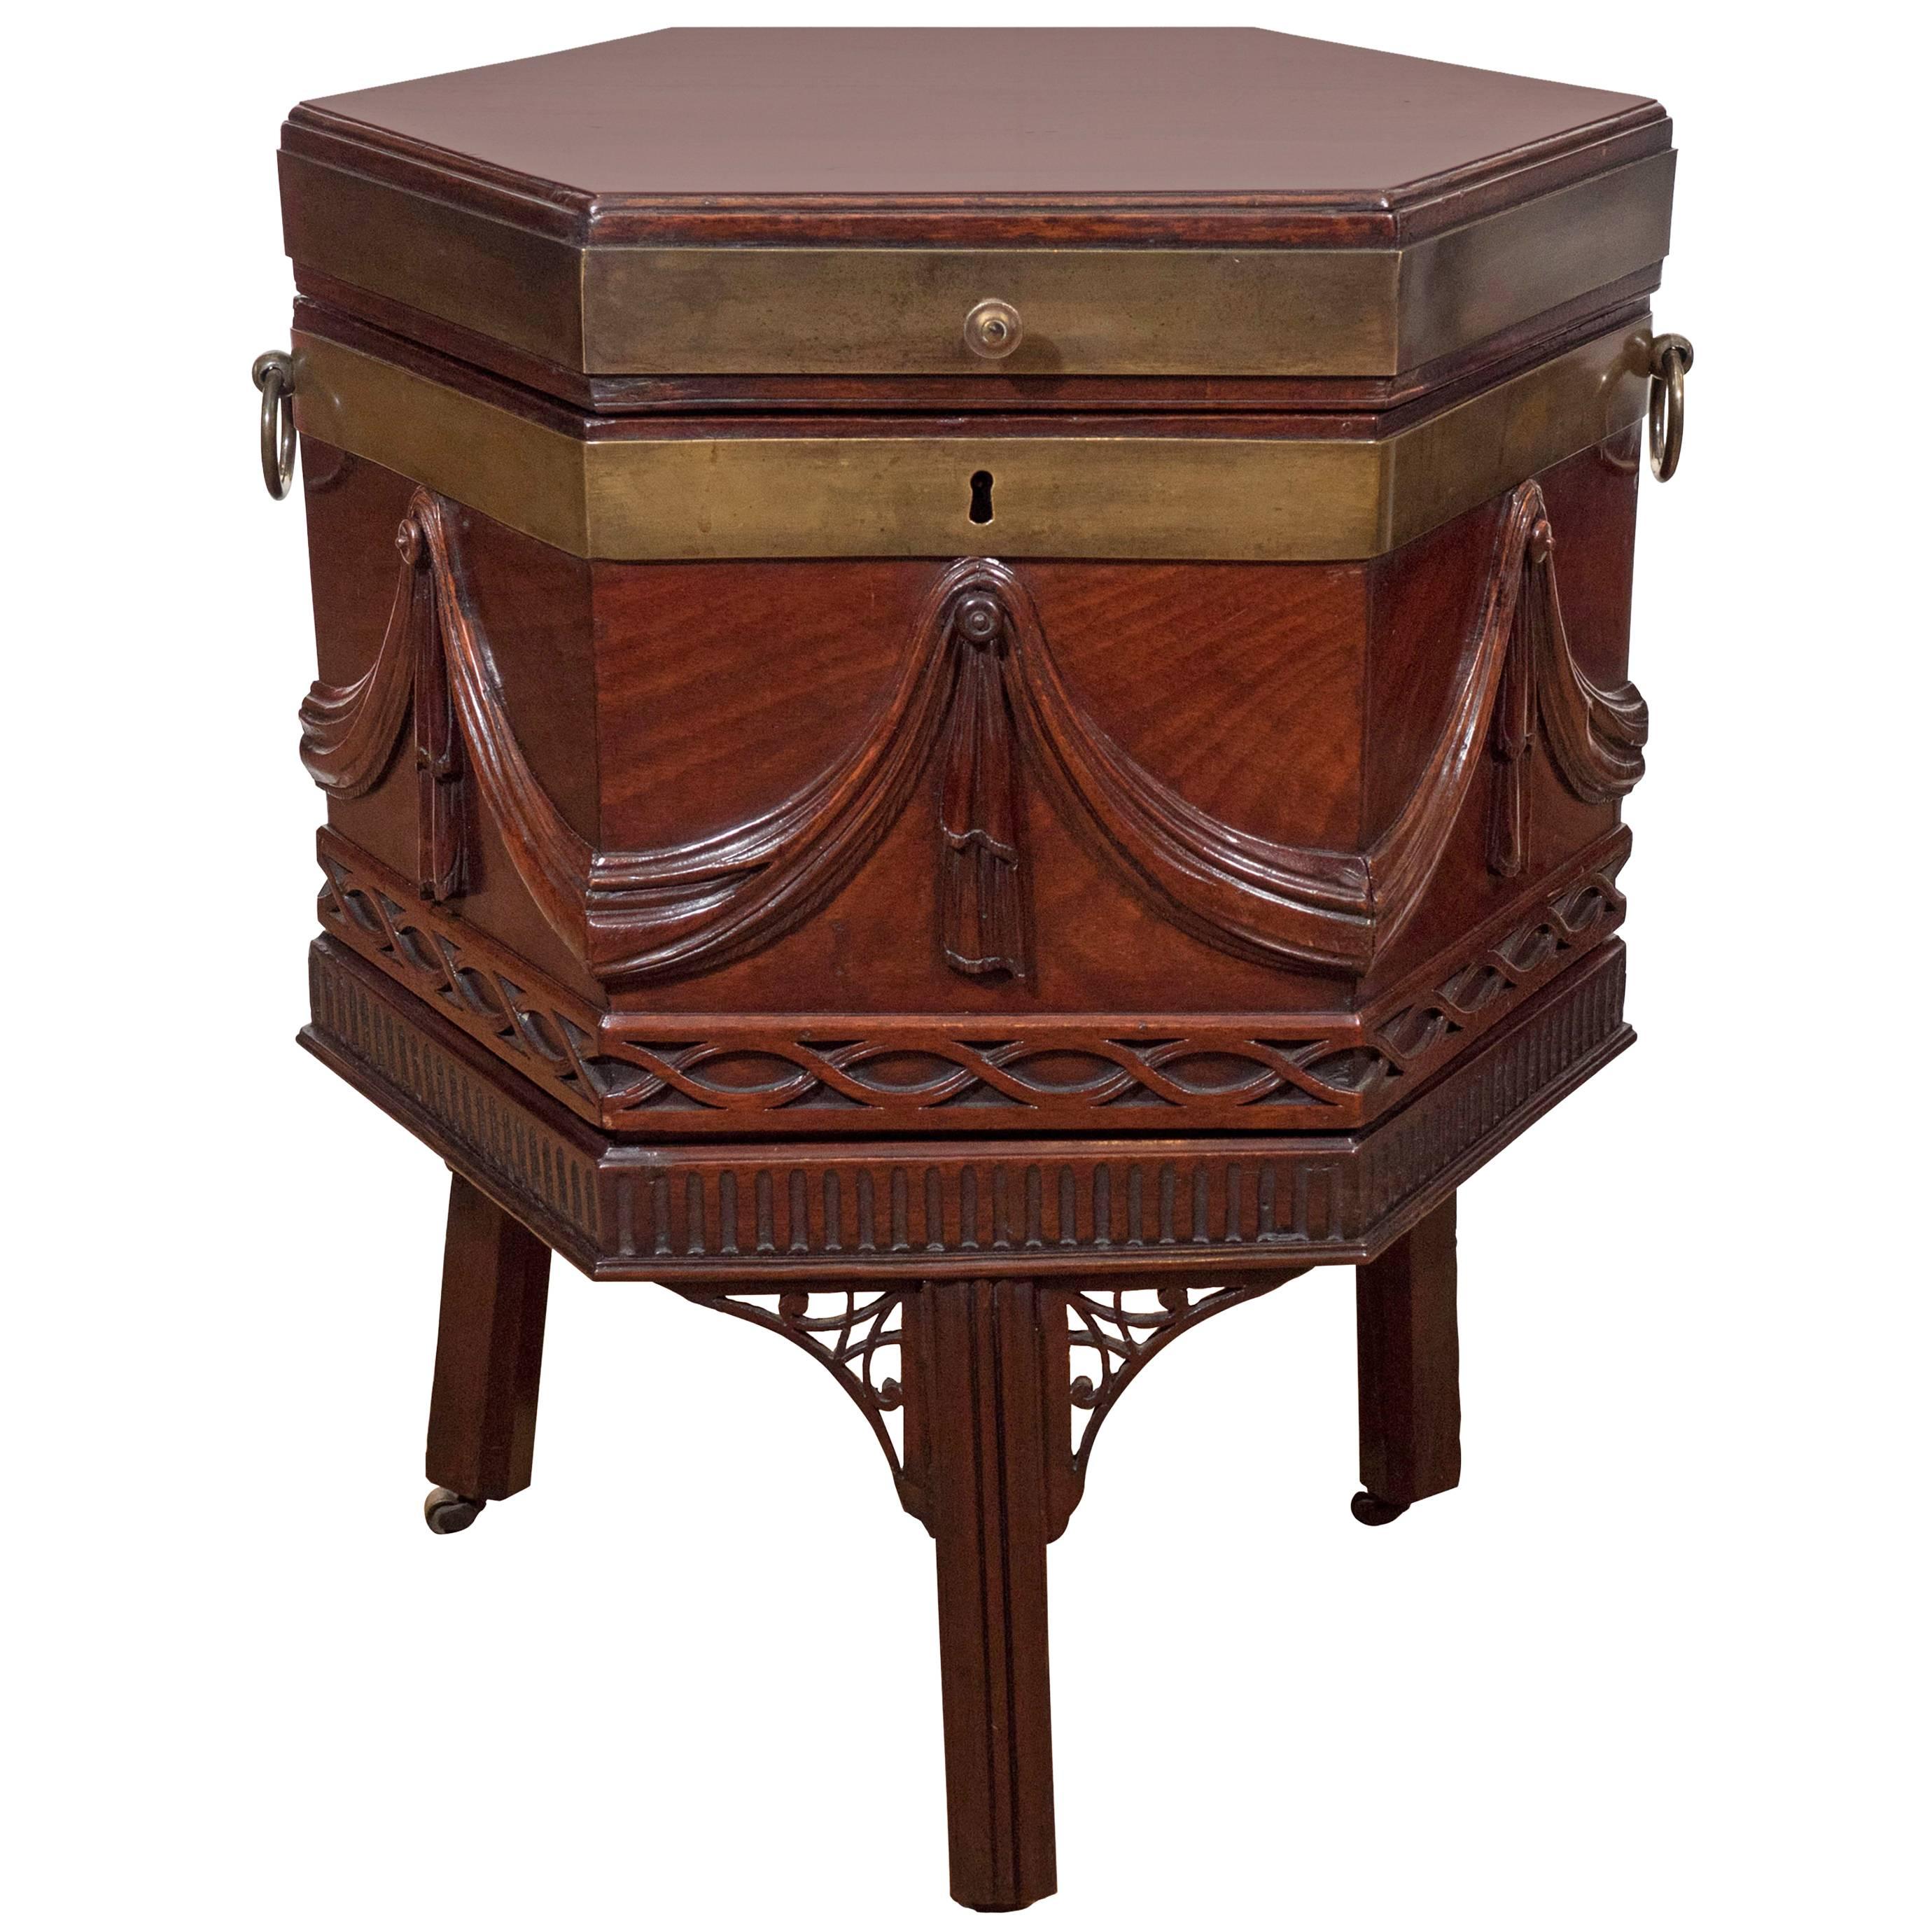 A Beautifully Carved George III Brass Bound Mahogany Hexagonal Wine Cooler For Sale